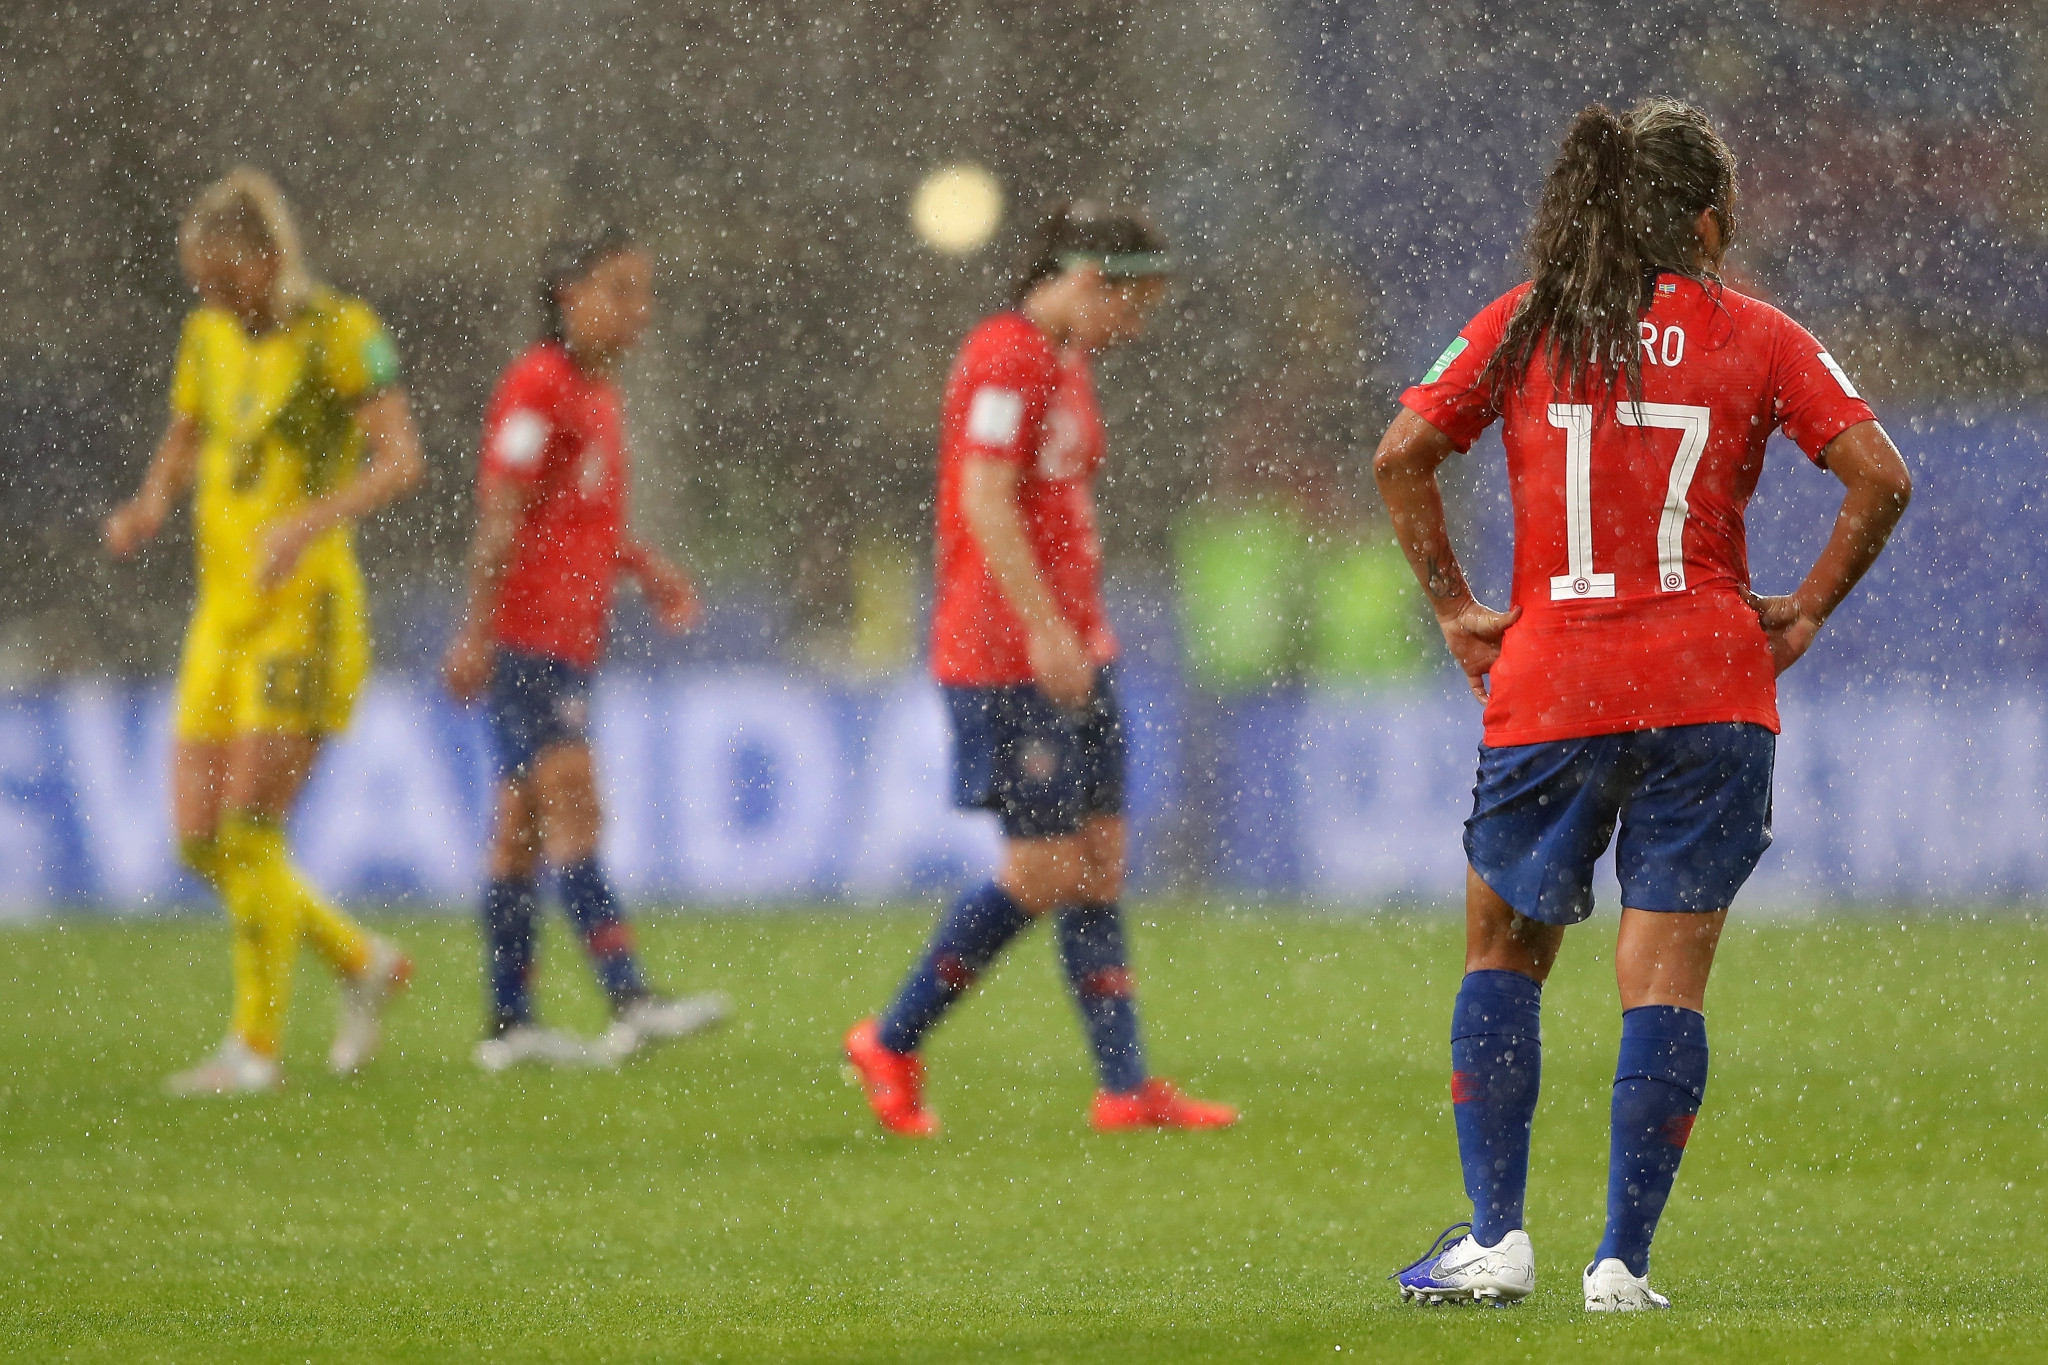 Stormy weather forces break in Sweden's clash with Chile at FIFA Women's World Cup